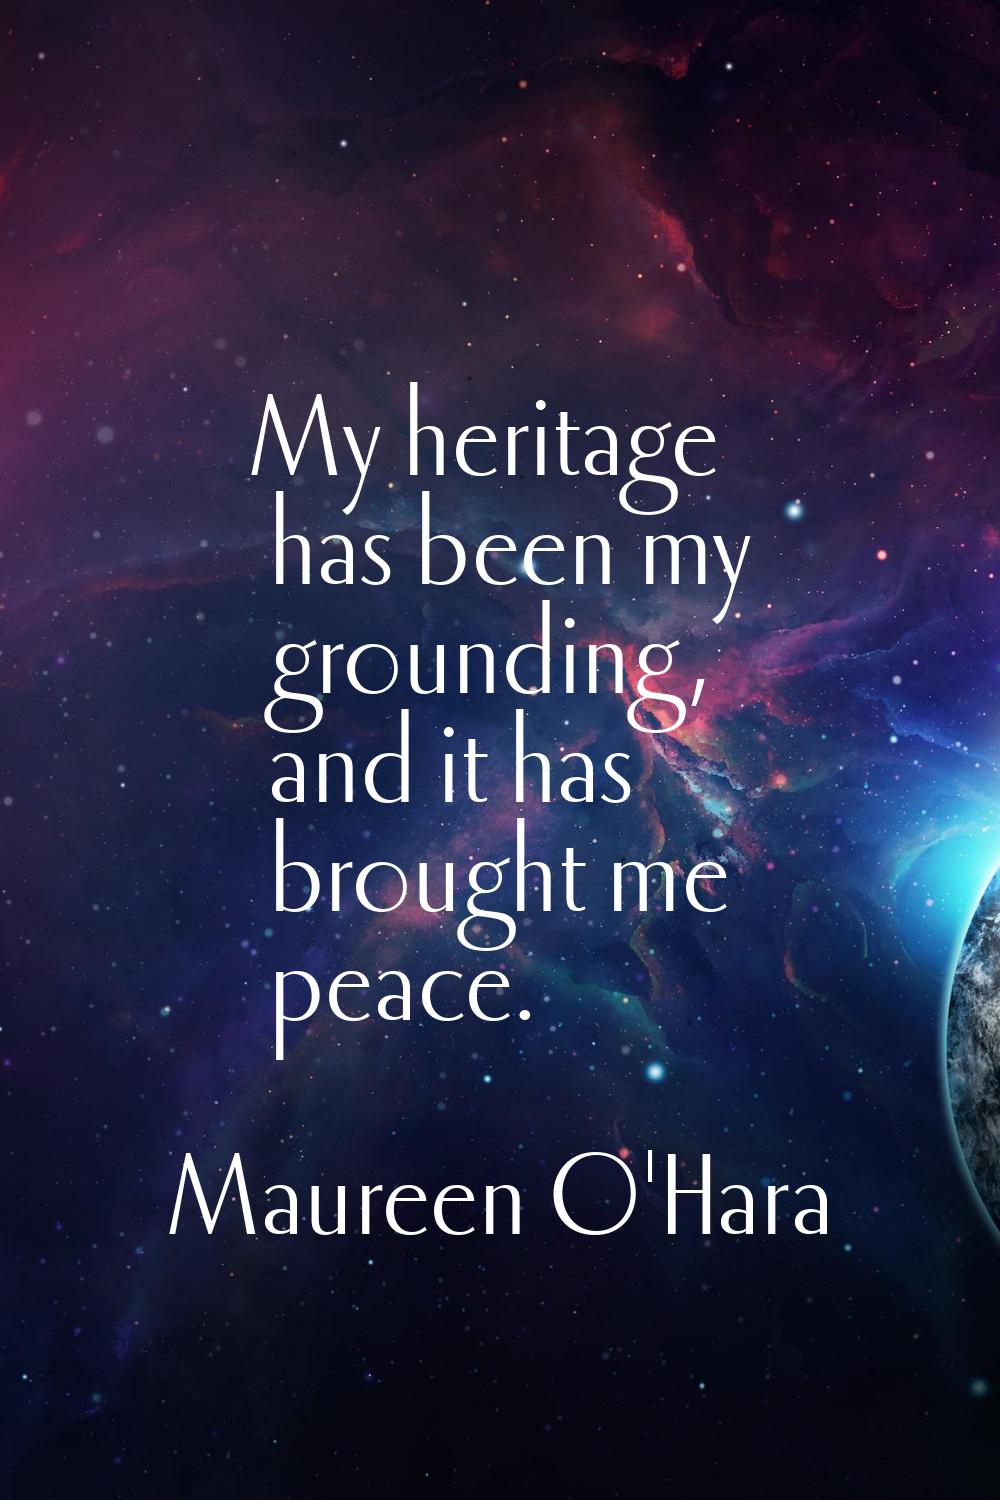 My heritage has been my grounding, and it has brought me peace.